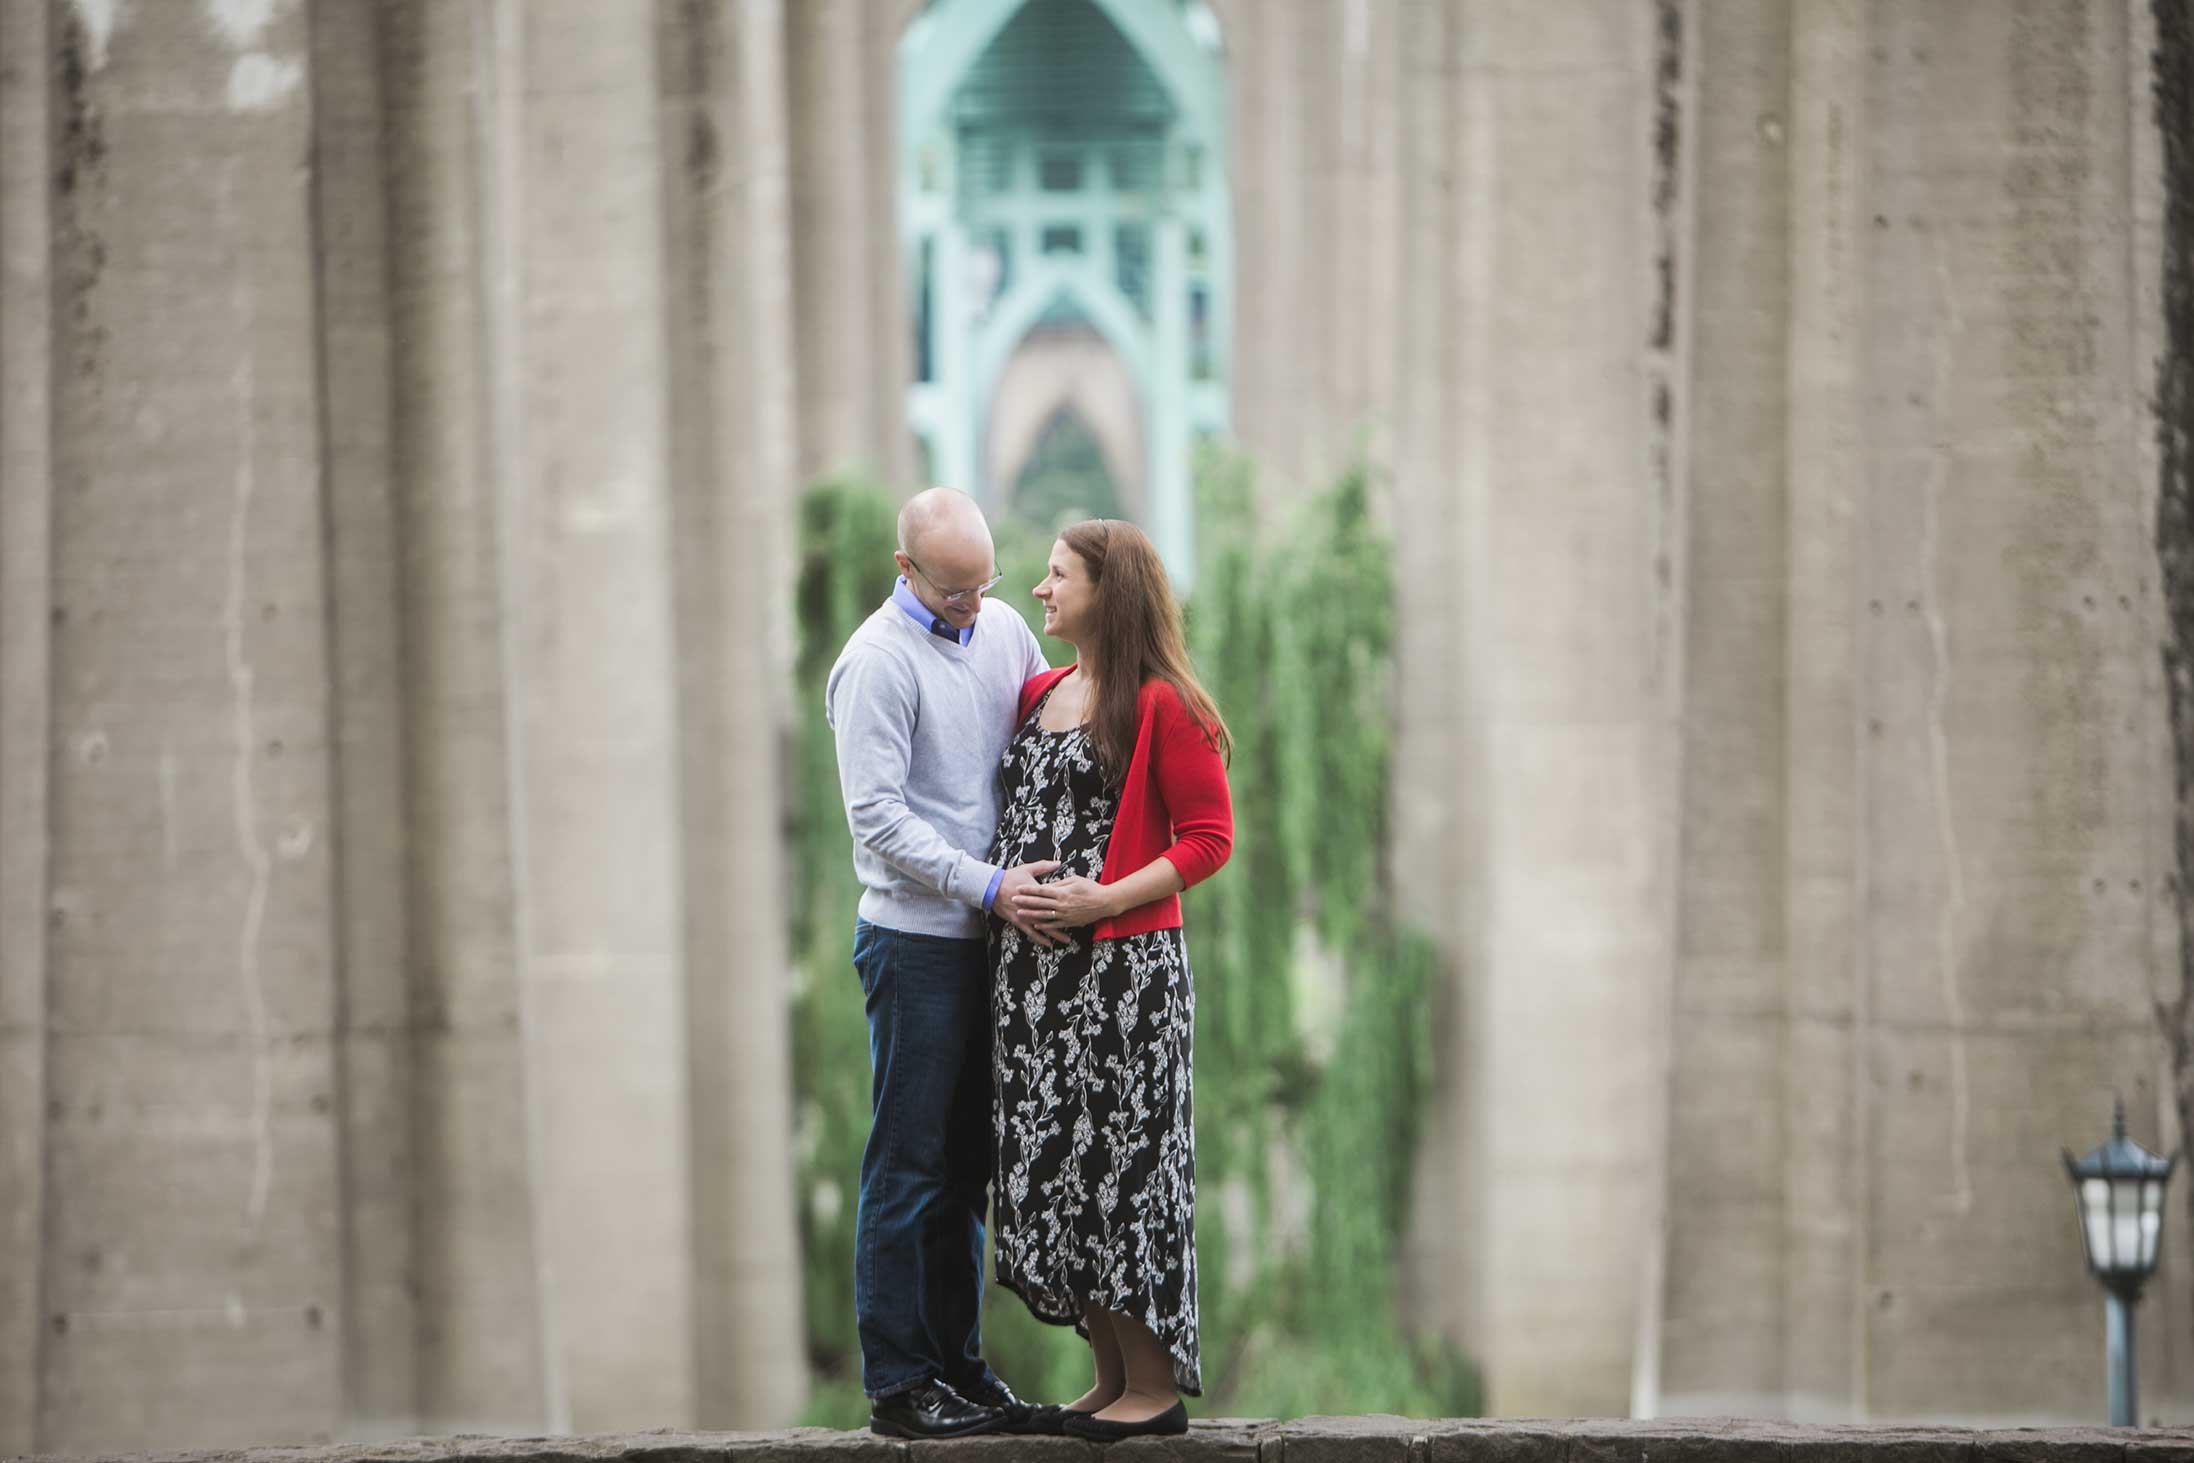 arches-under-bridge-cathedral-park-portland-maternity-belly-pregnancy